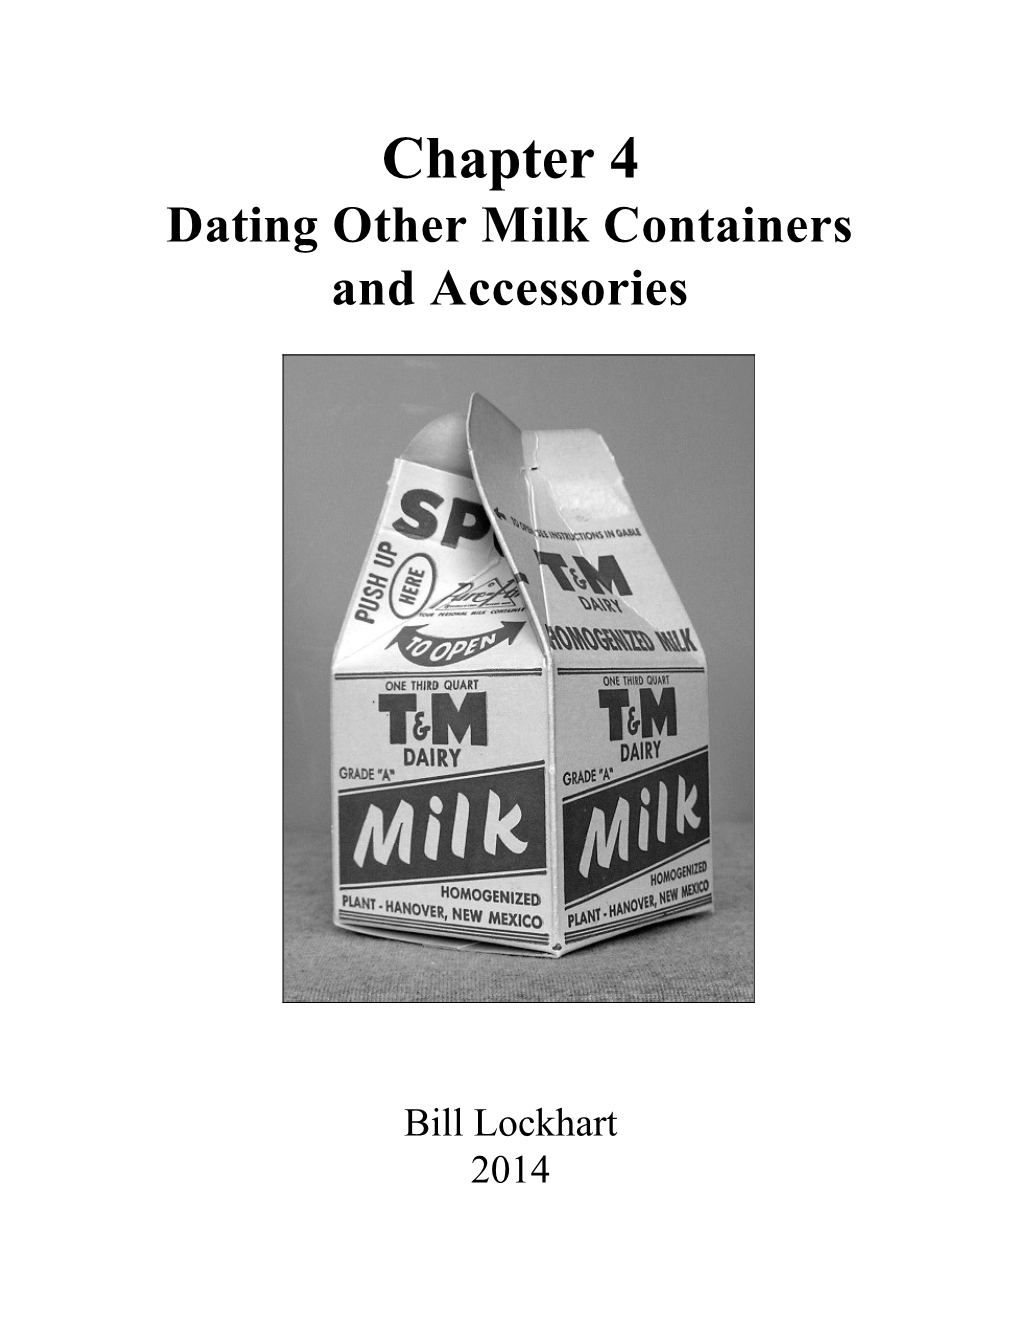 Chapter 4 Dating Other Milk Containers and Accessories